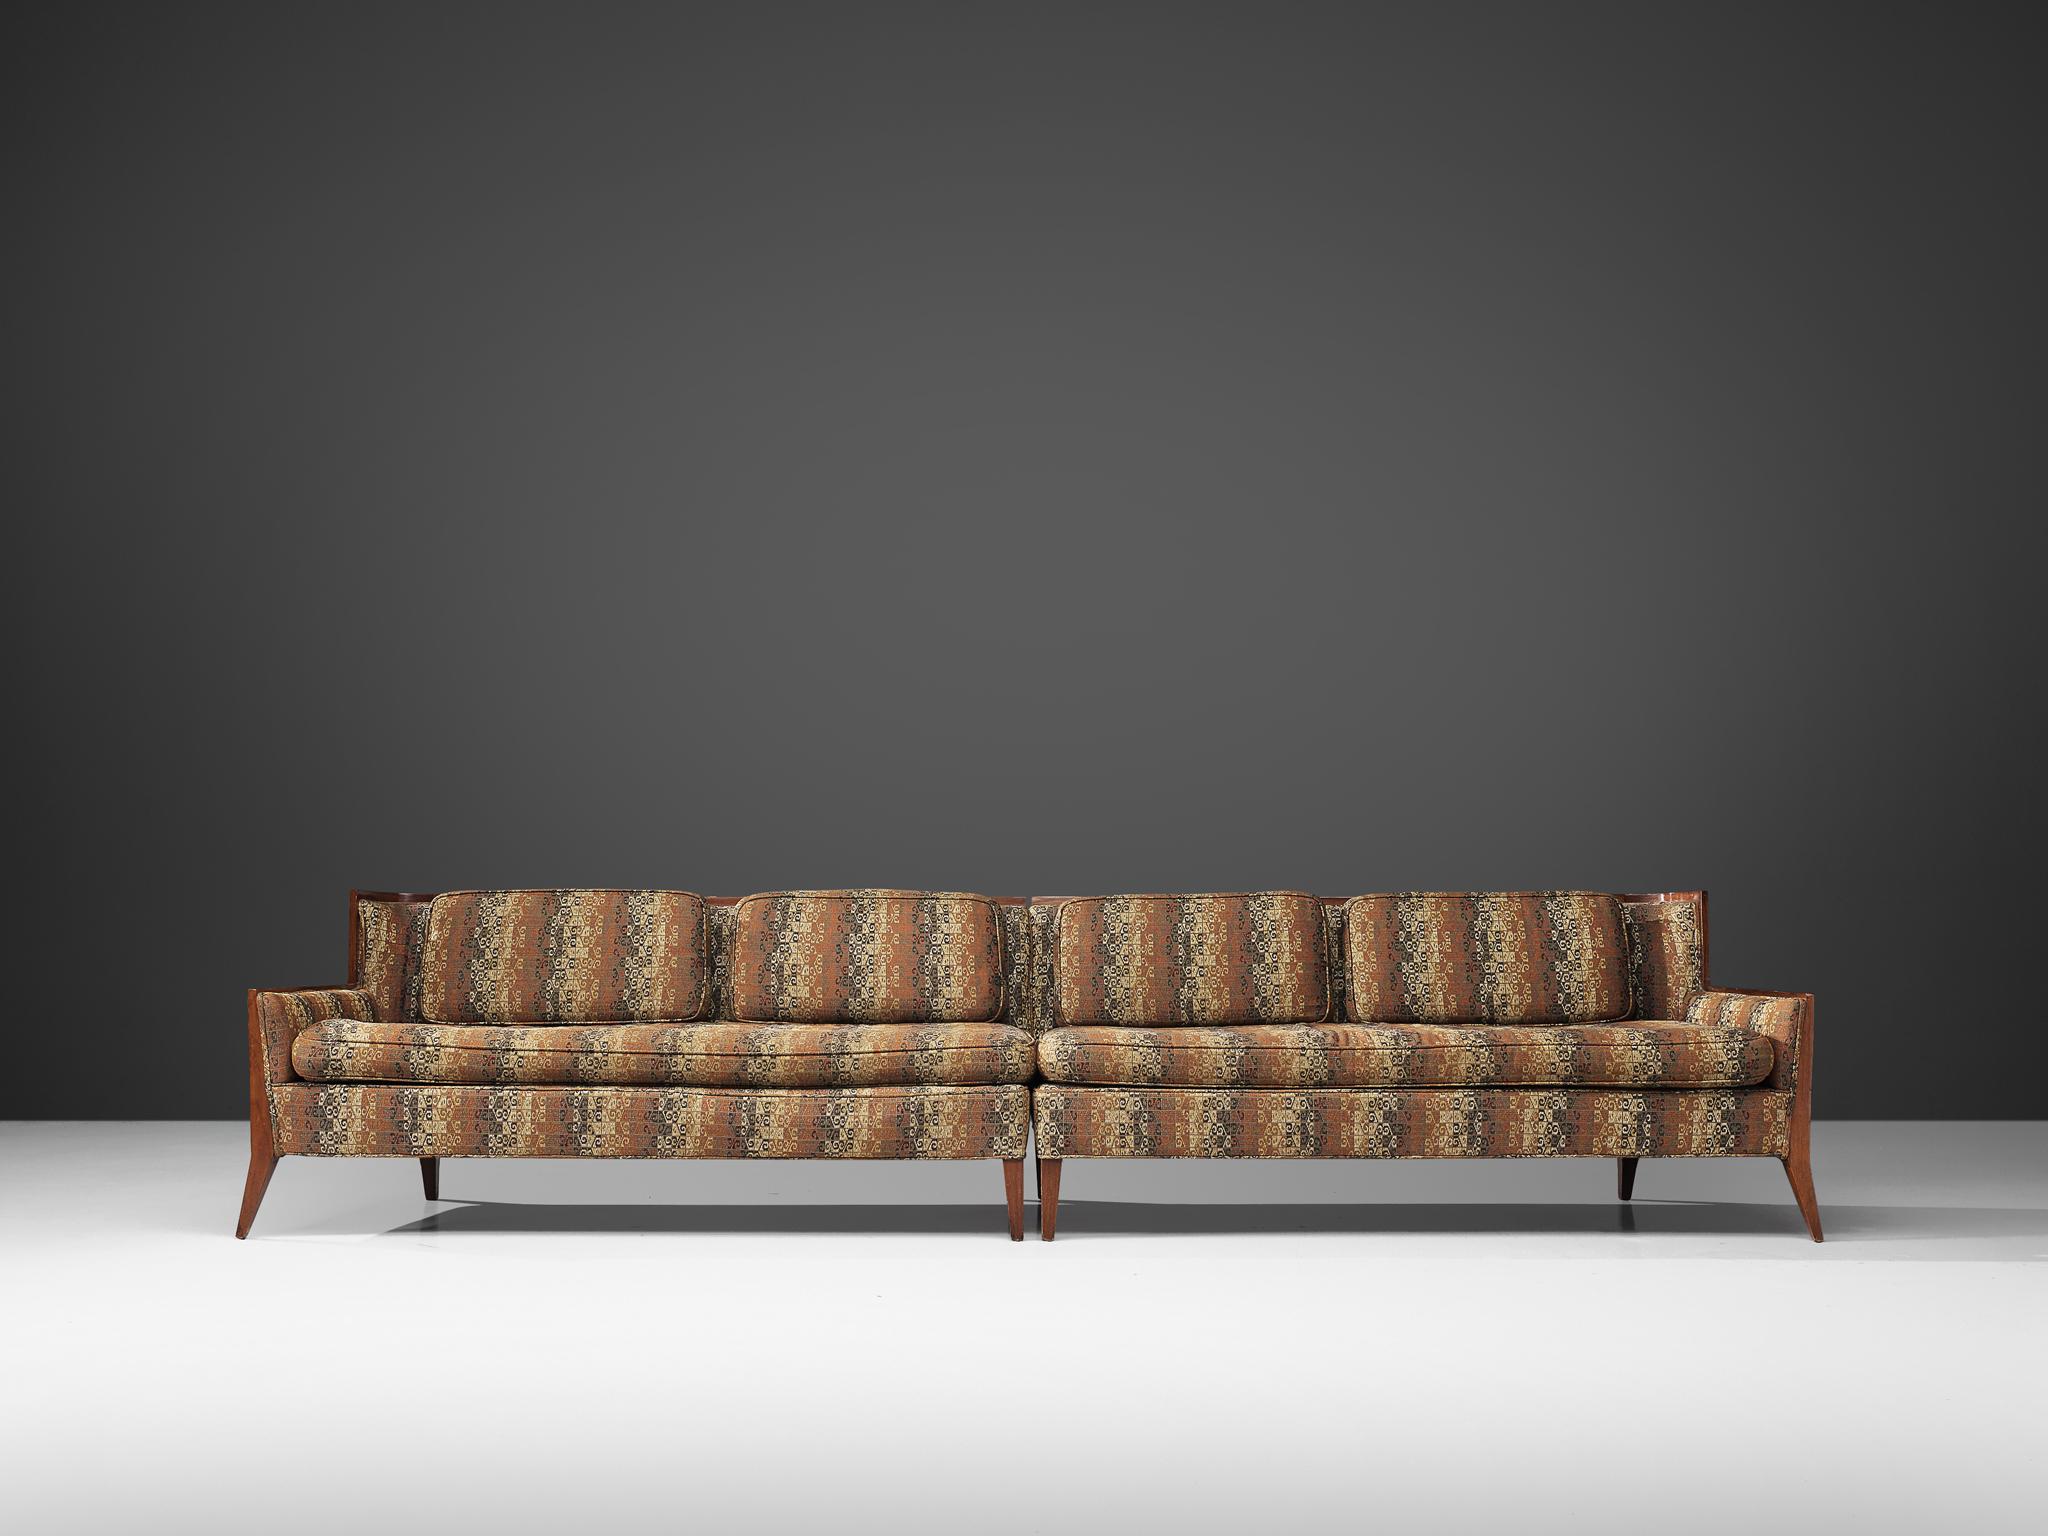 Paul McCobb for Directional, sectional sofa, patterned upholstery, walnut, United States, 1950s

A large sectional sofa, consisting of two elements designed by Paul McCobb for Directional. The two parts can either be placed next to each other and